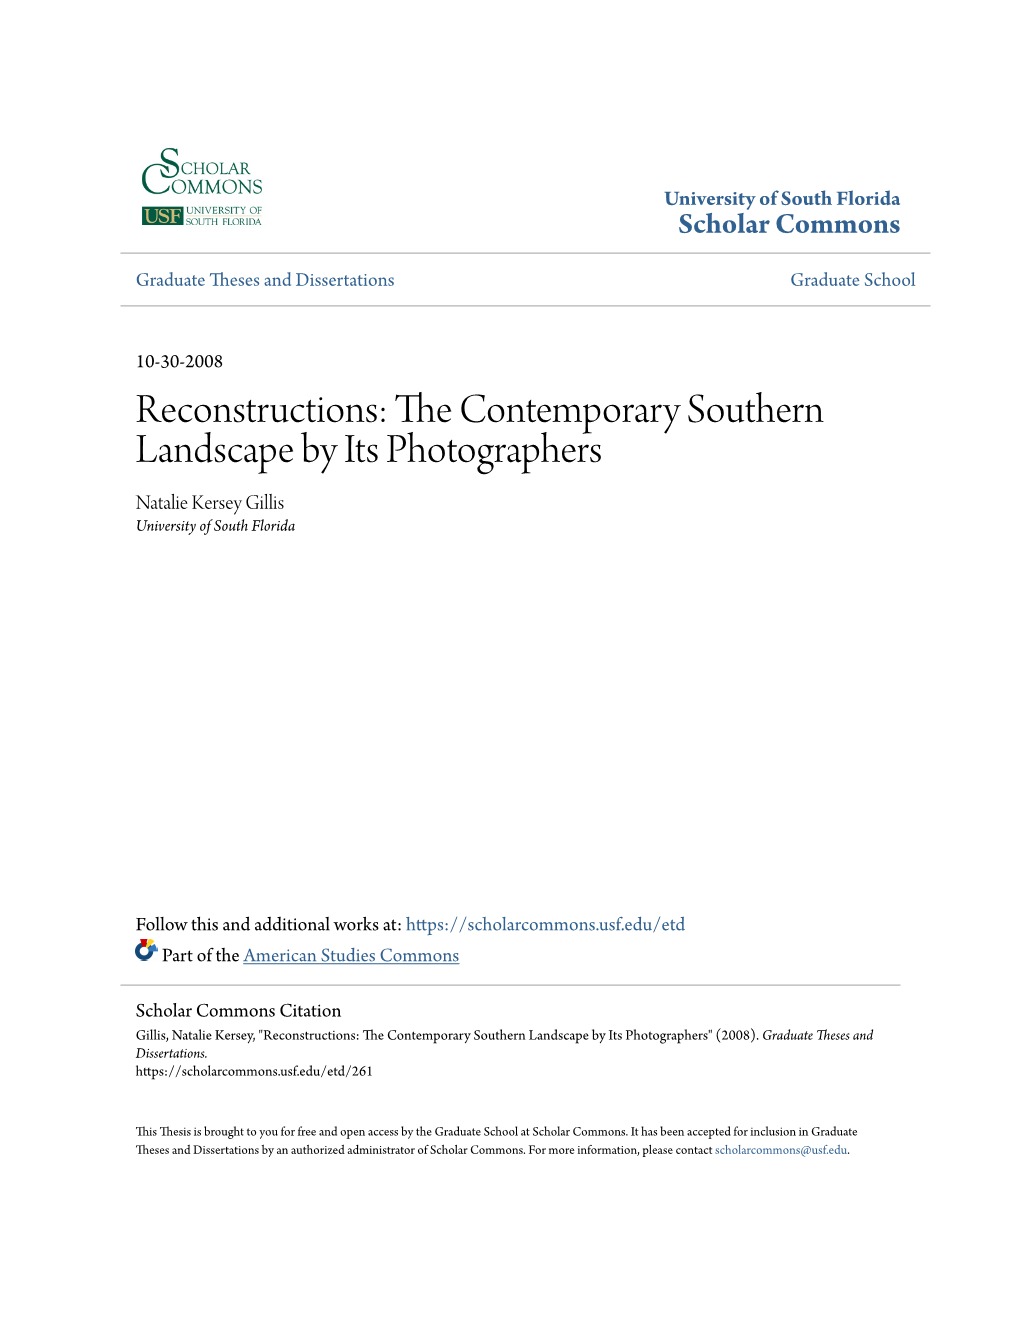 The Contemporary Southern Landscape by Its Photographers